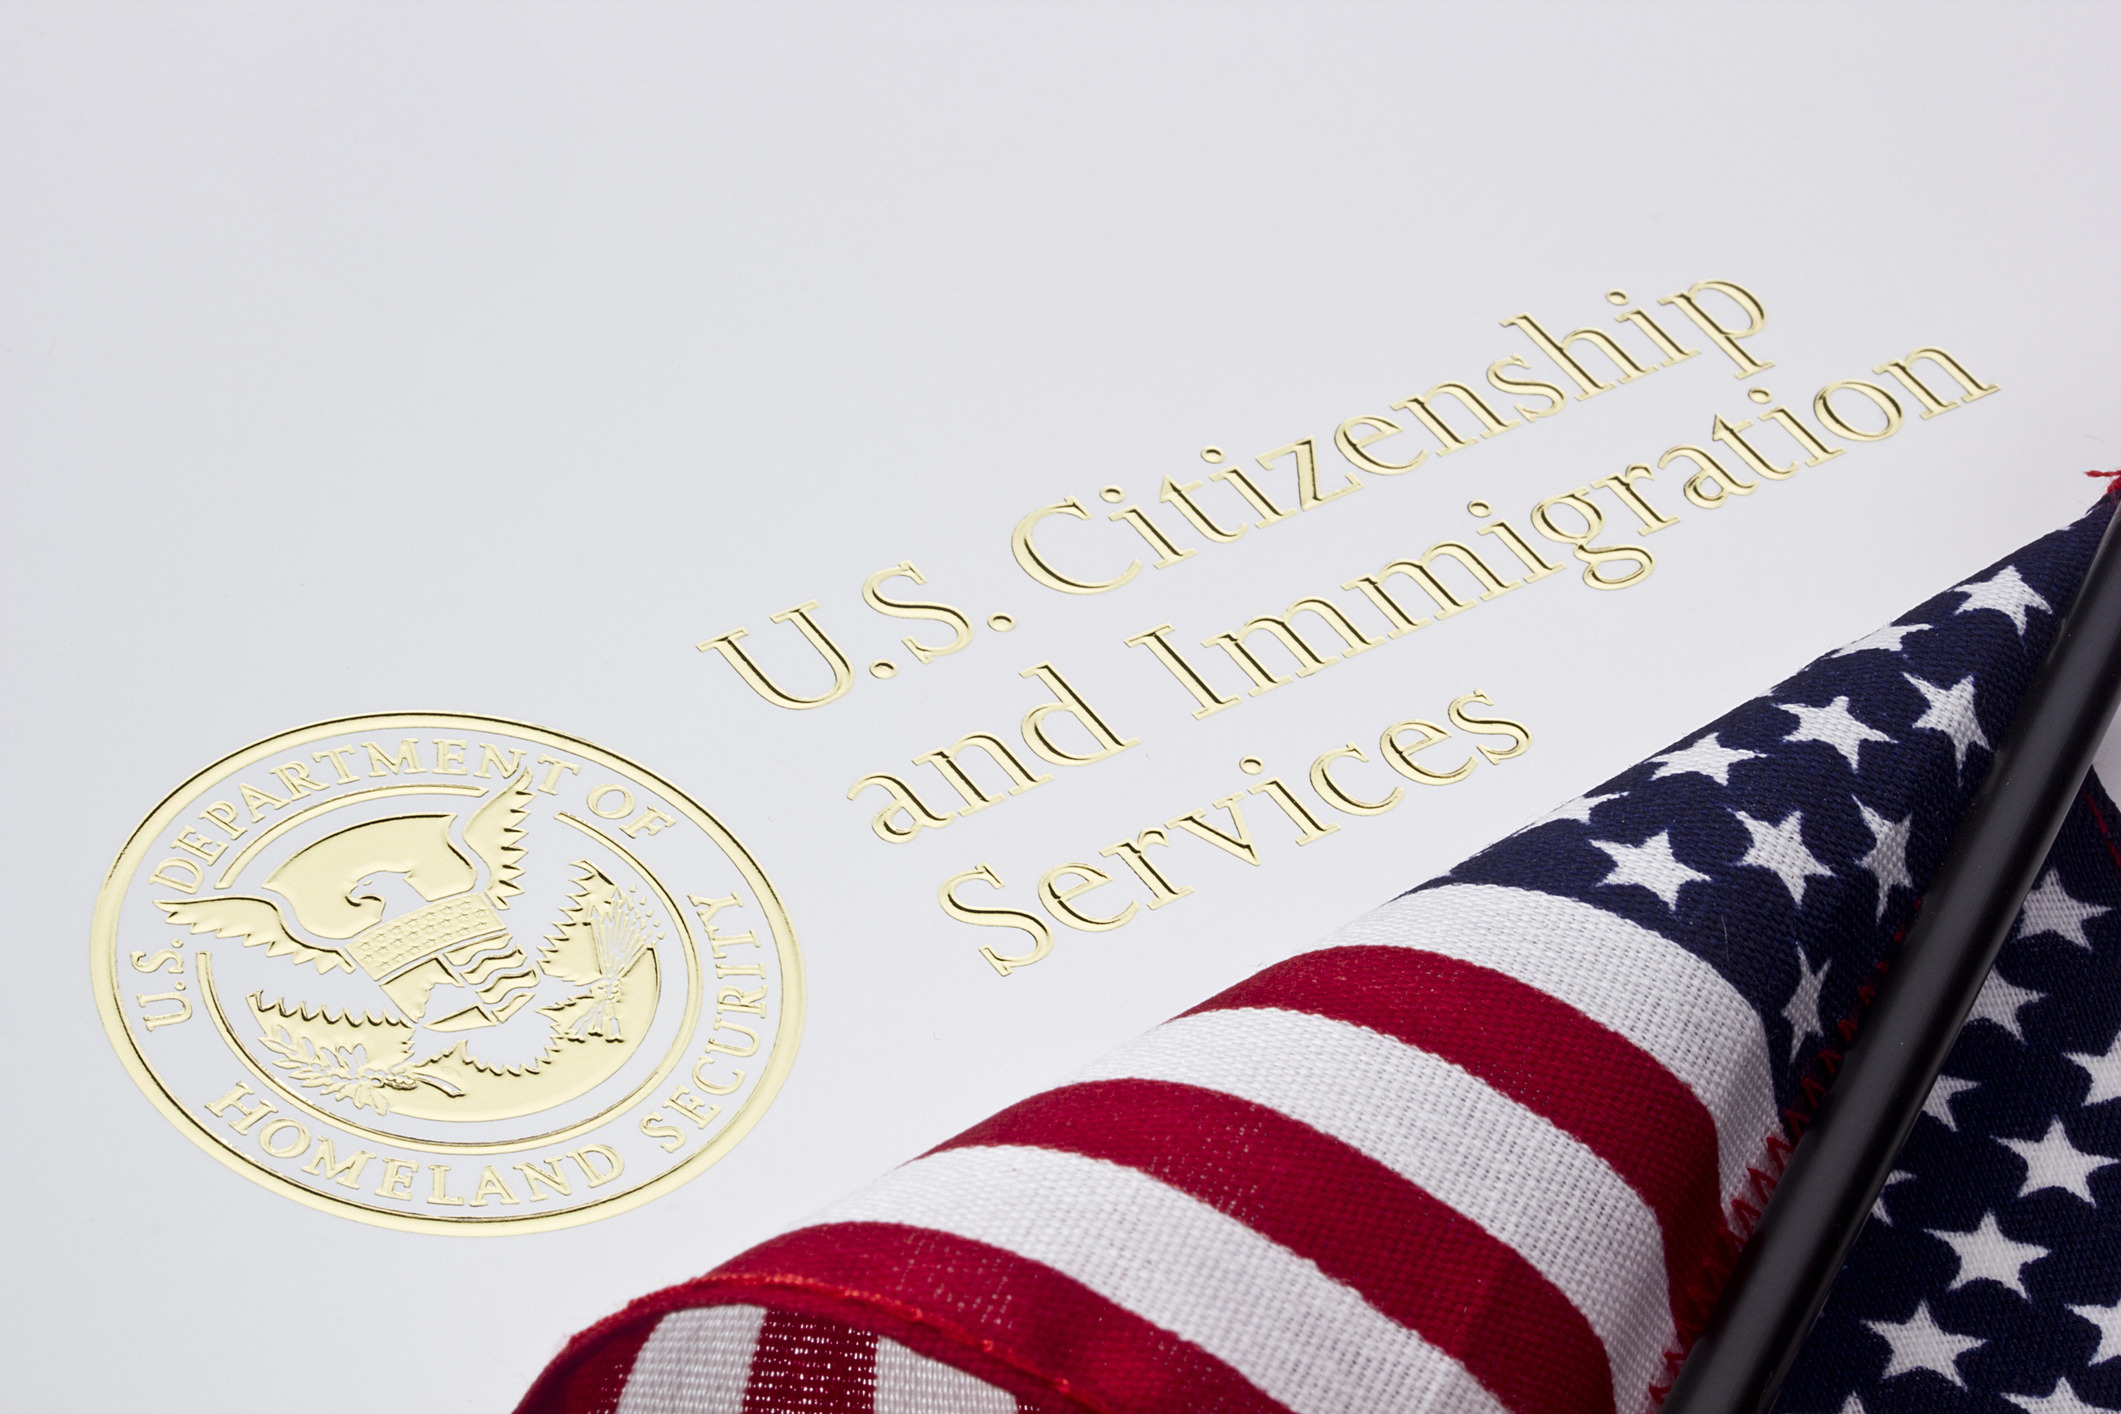 What Should Employers Do When Current Form I-9 Expires August 31?